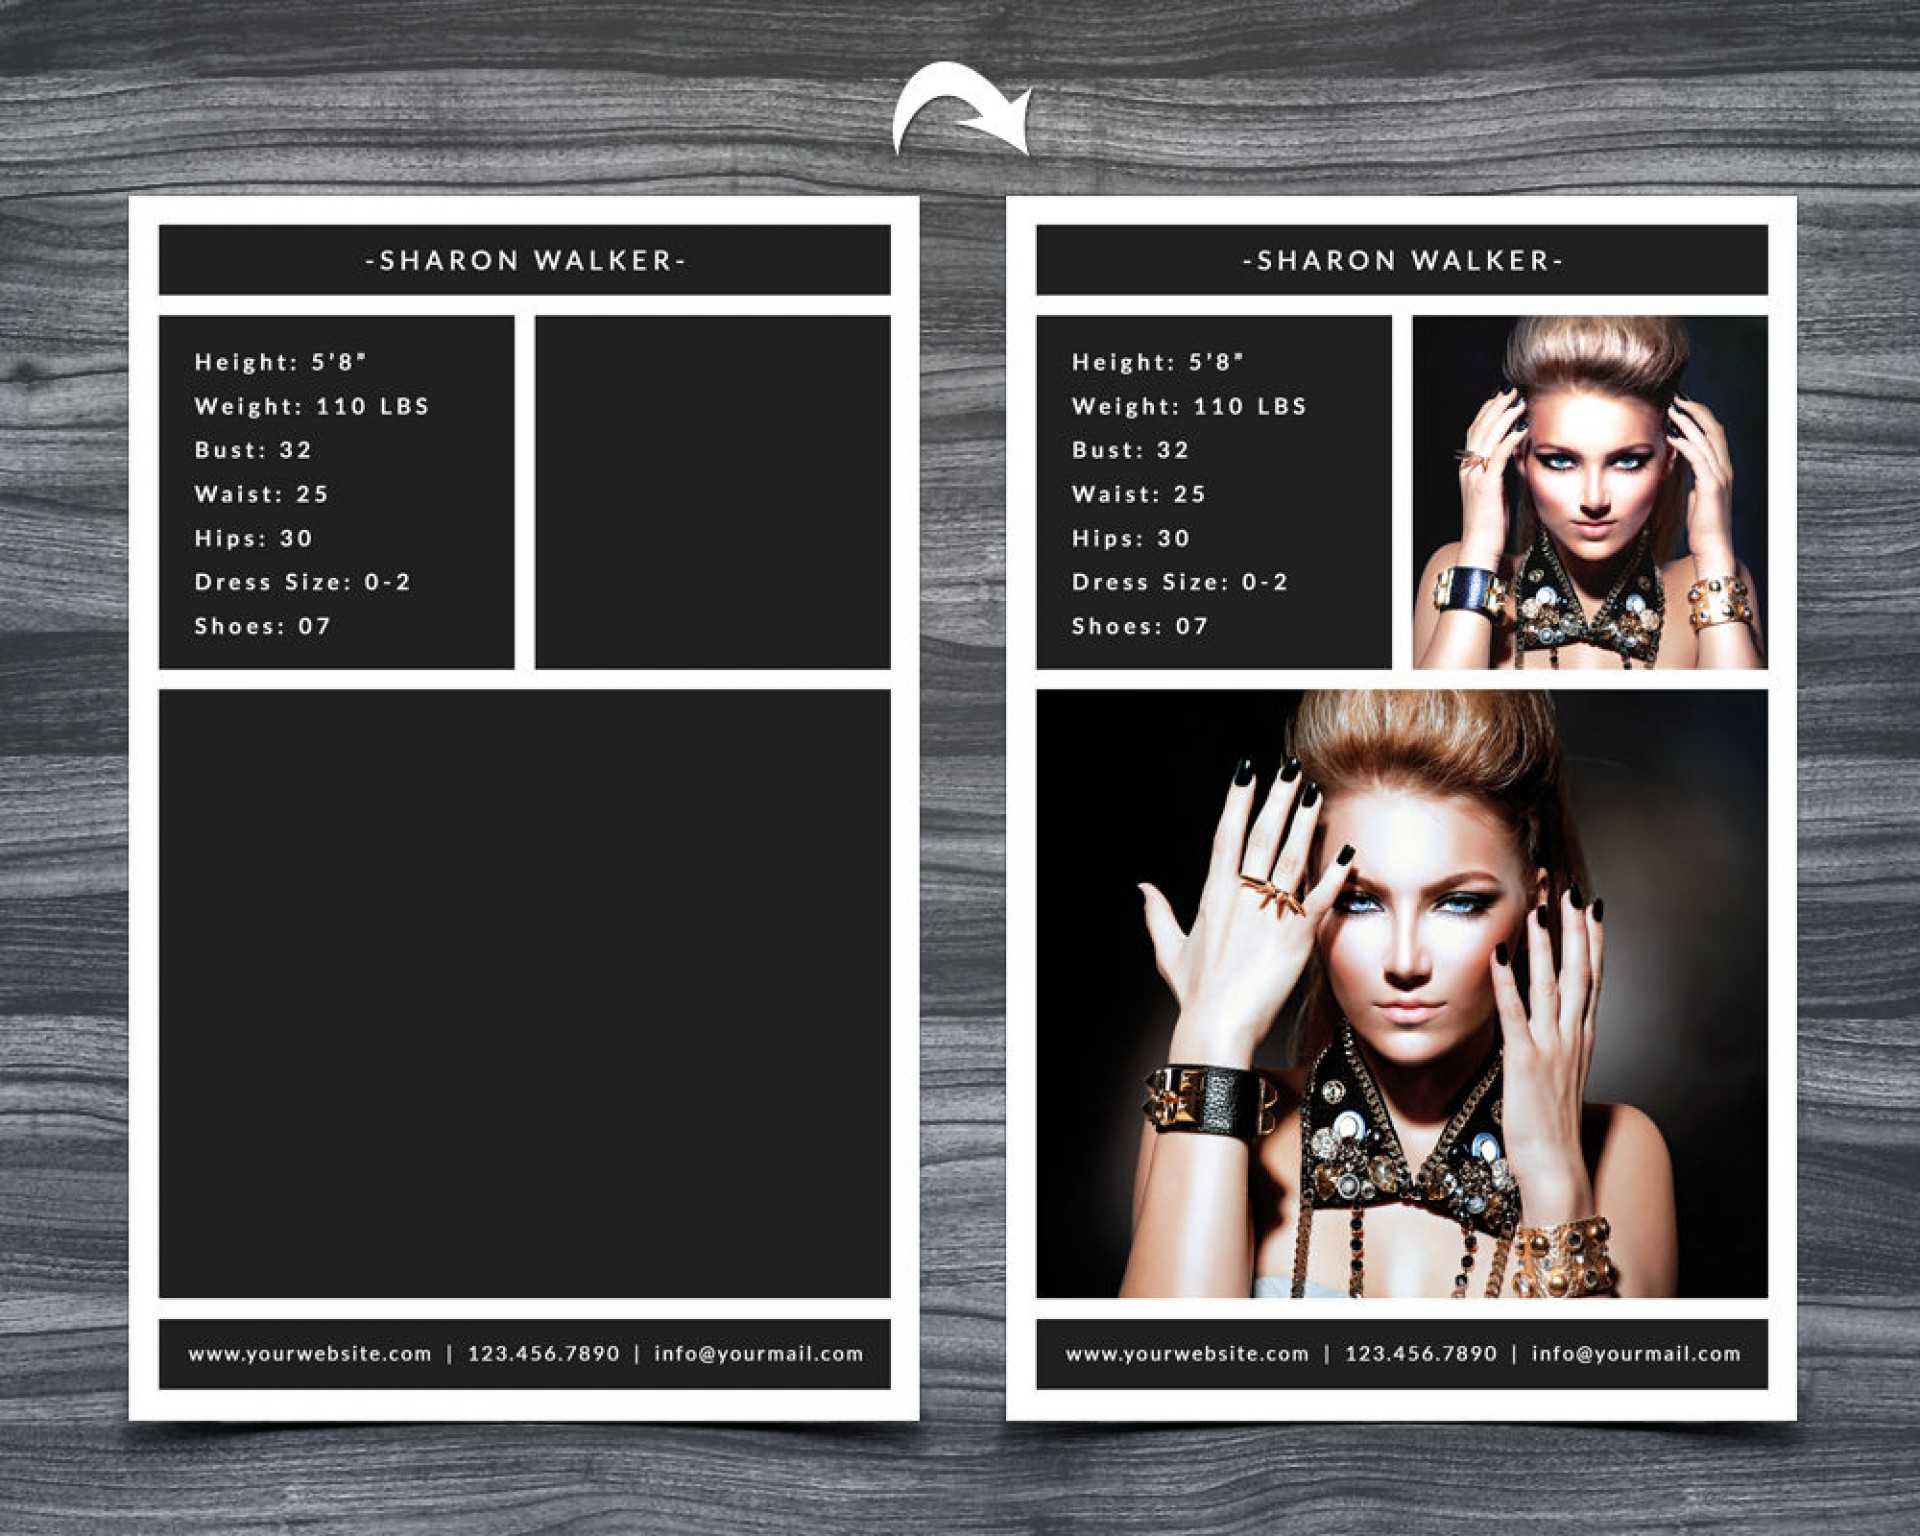 005 Model Comp Card Template Ideas Outstanding Psd Online With Comp Card Template Download